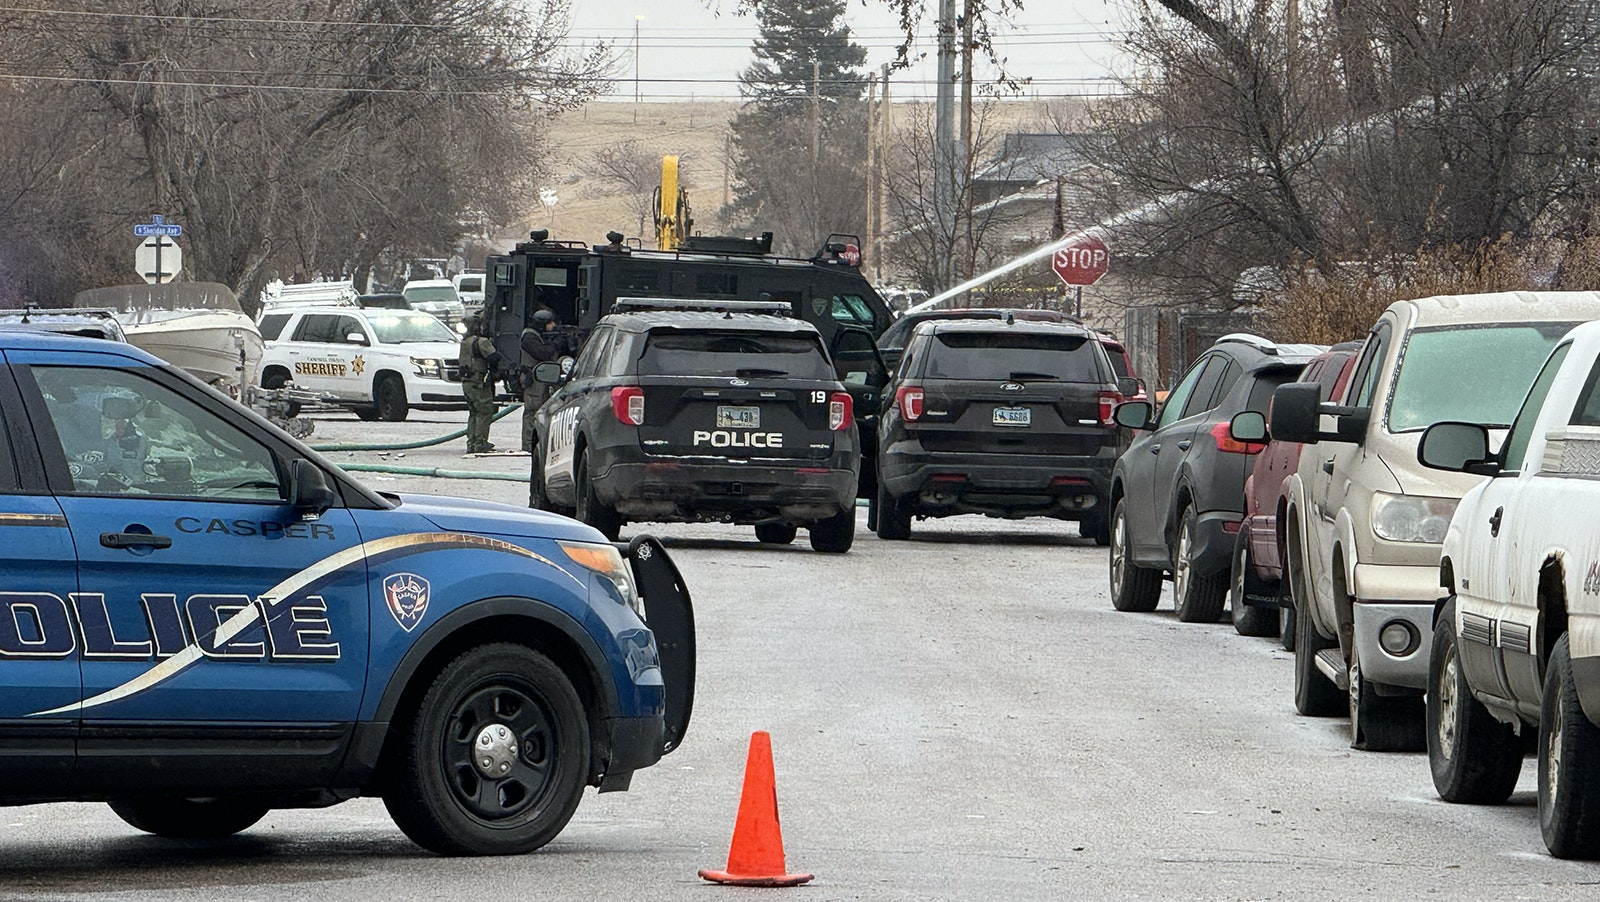 Scenes Wednesday morning from a standoff in Sheridan between law enforcement and a man suspected of shooting and killing a police officer.